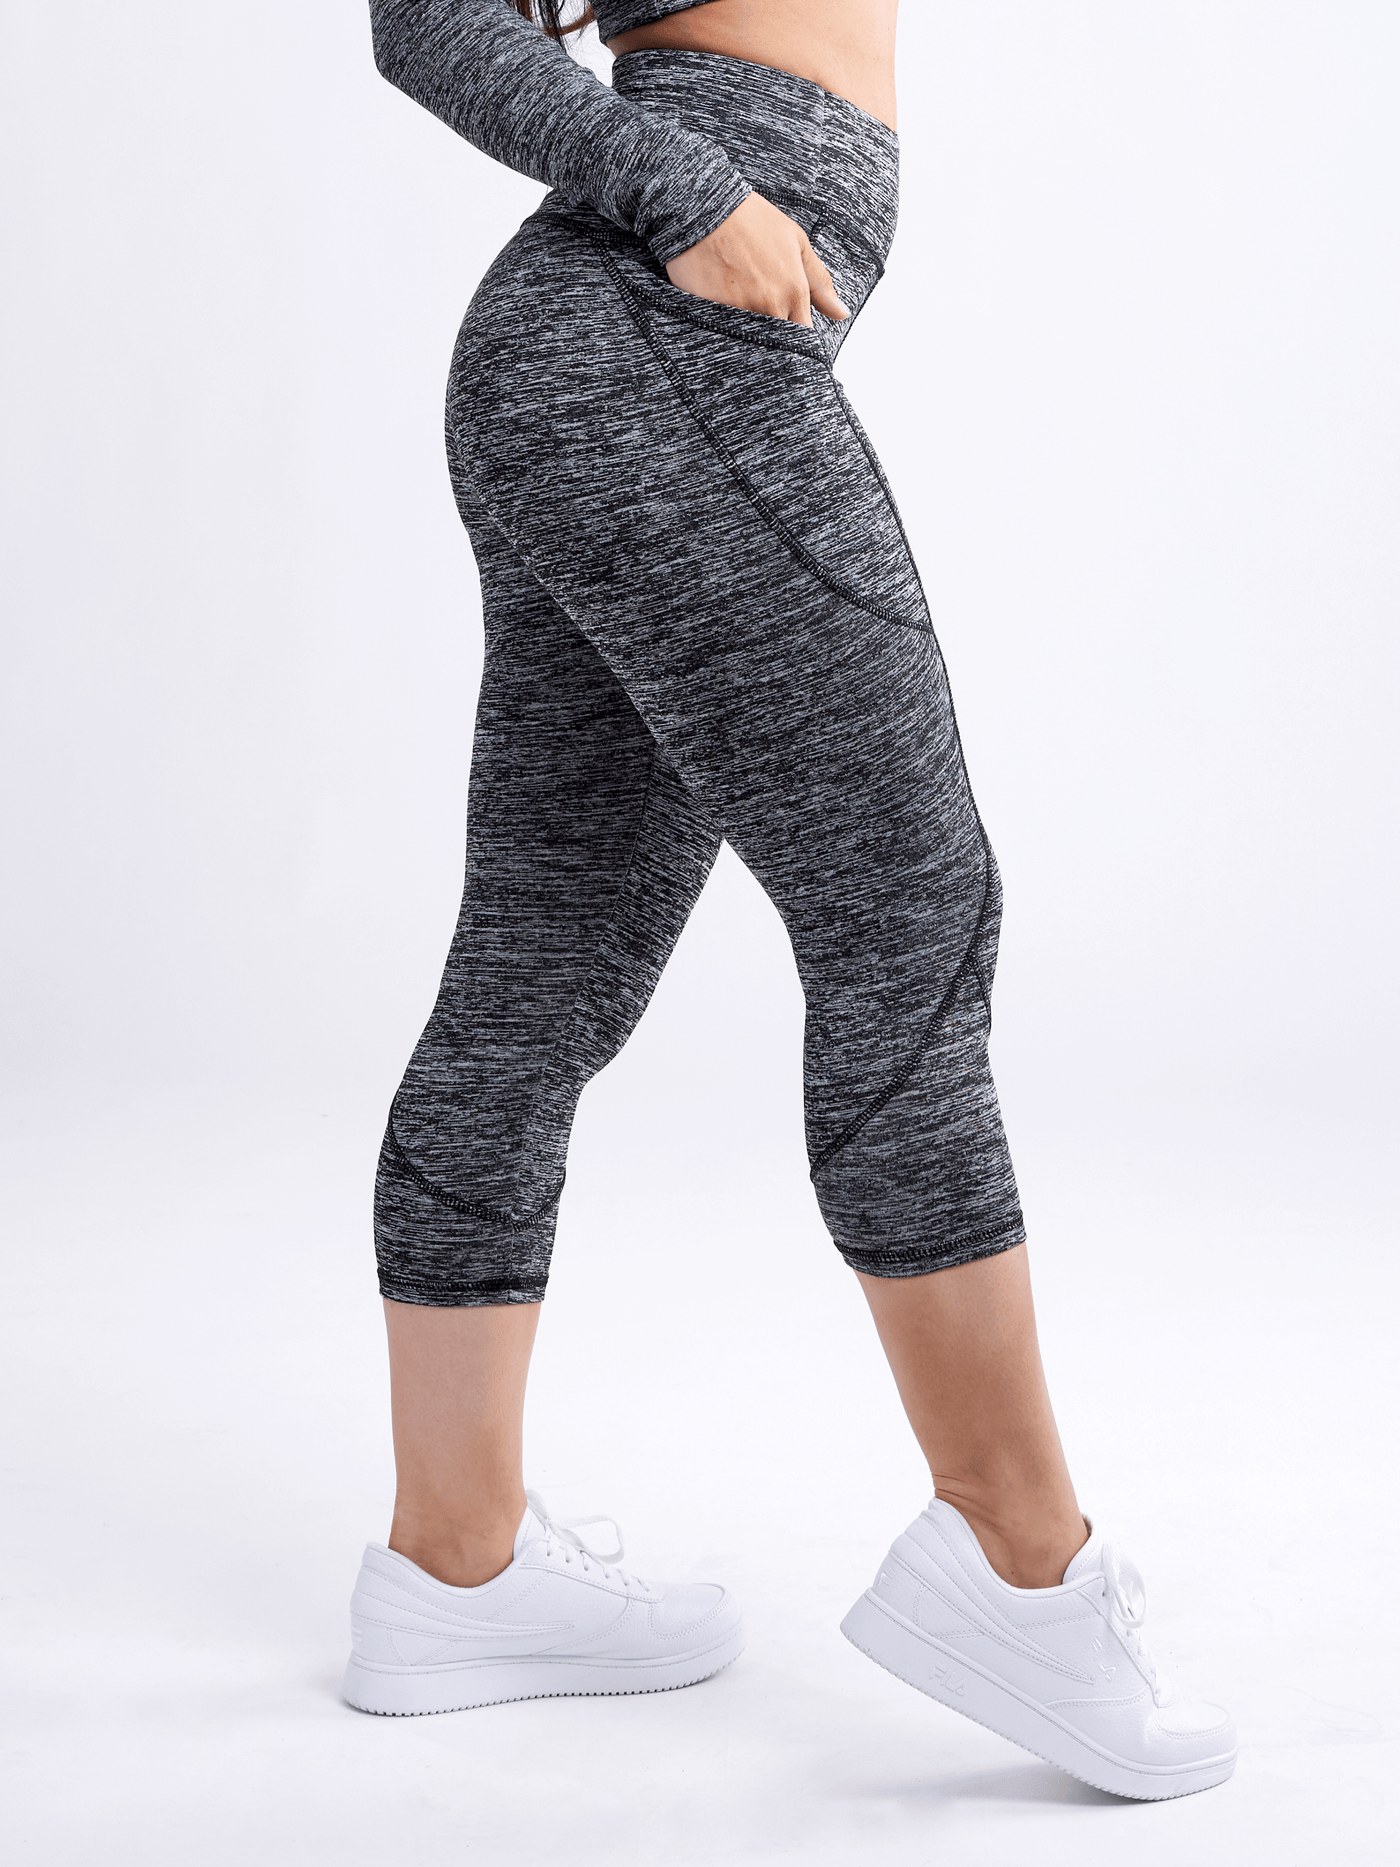 Joyshaper High Waisted Leggings with Pockets for Women Legging with Mesh  Cutouts Workout Yoga Pants